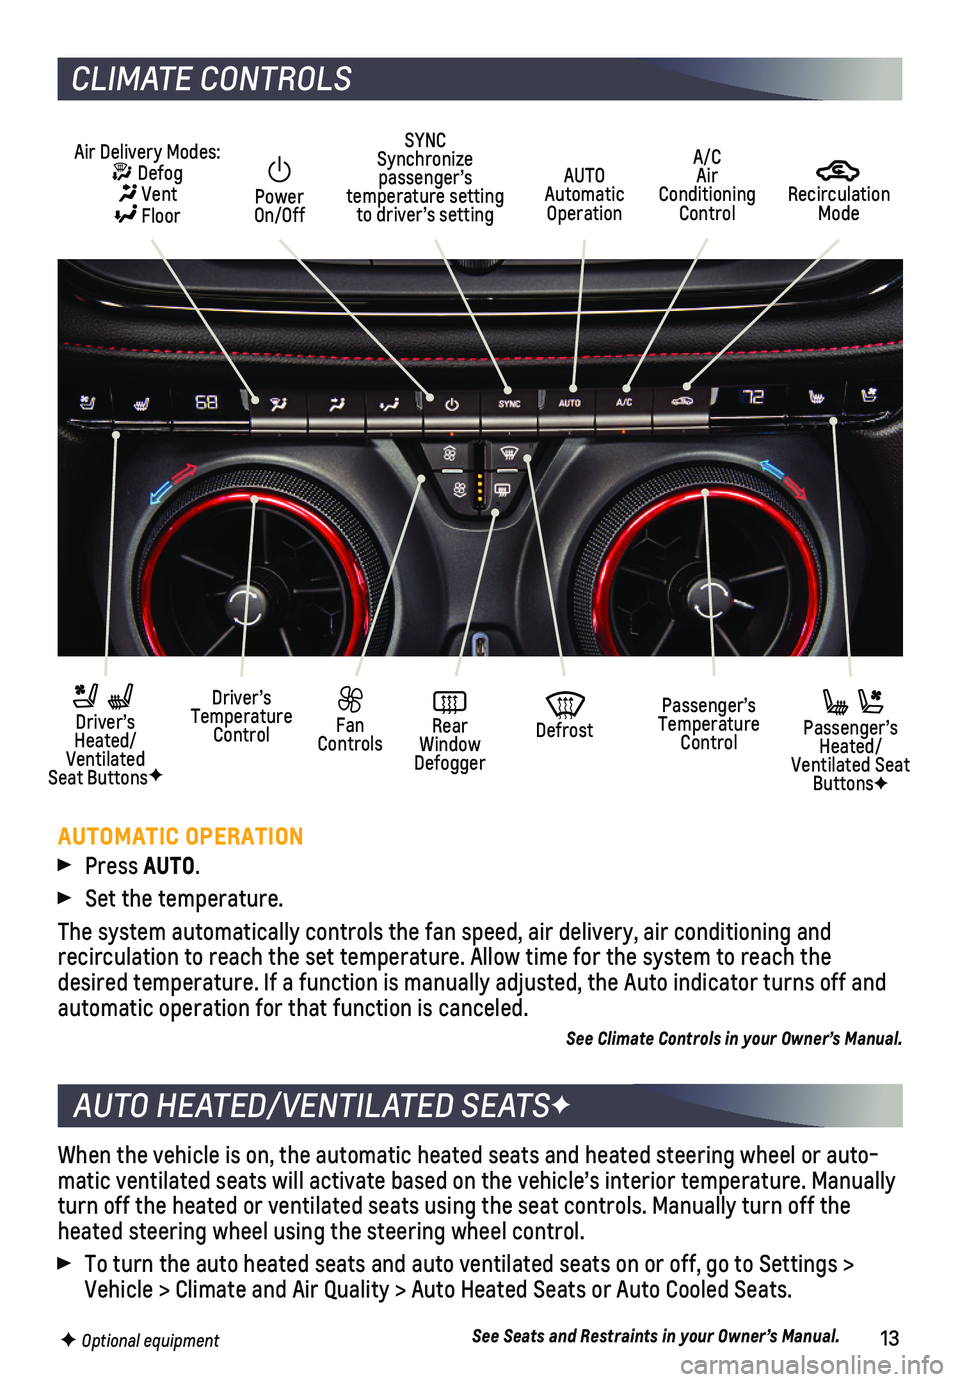 CHEVROLET BLAZER 2020  Get To Know Guide 13
When the vehicle is on, the automatic heated seats and heated steering w\
heel or auto-matic ventilated seats will activate based on the vehicle’s interior \
temperature. Manually turn off the he